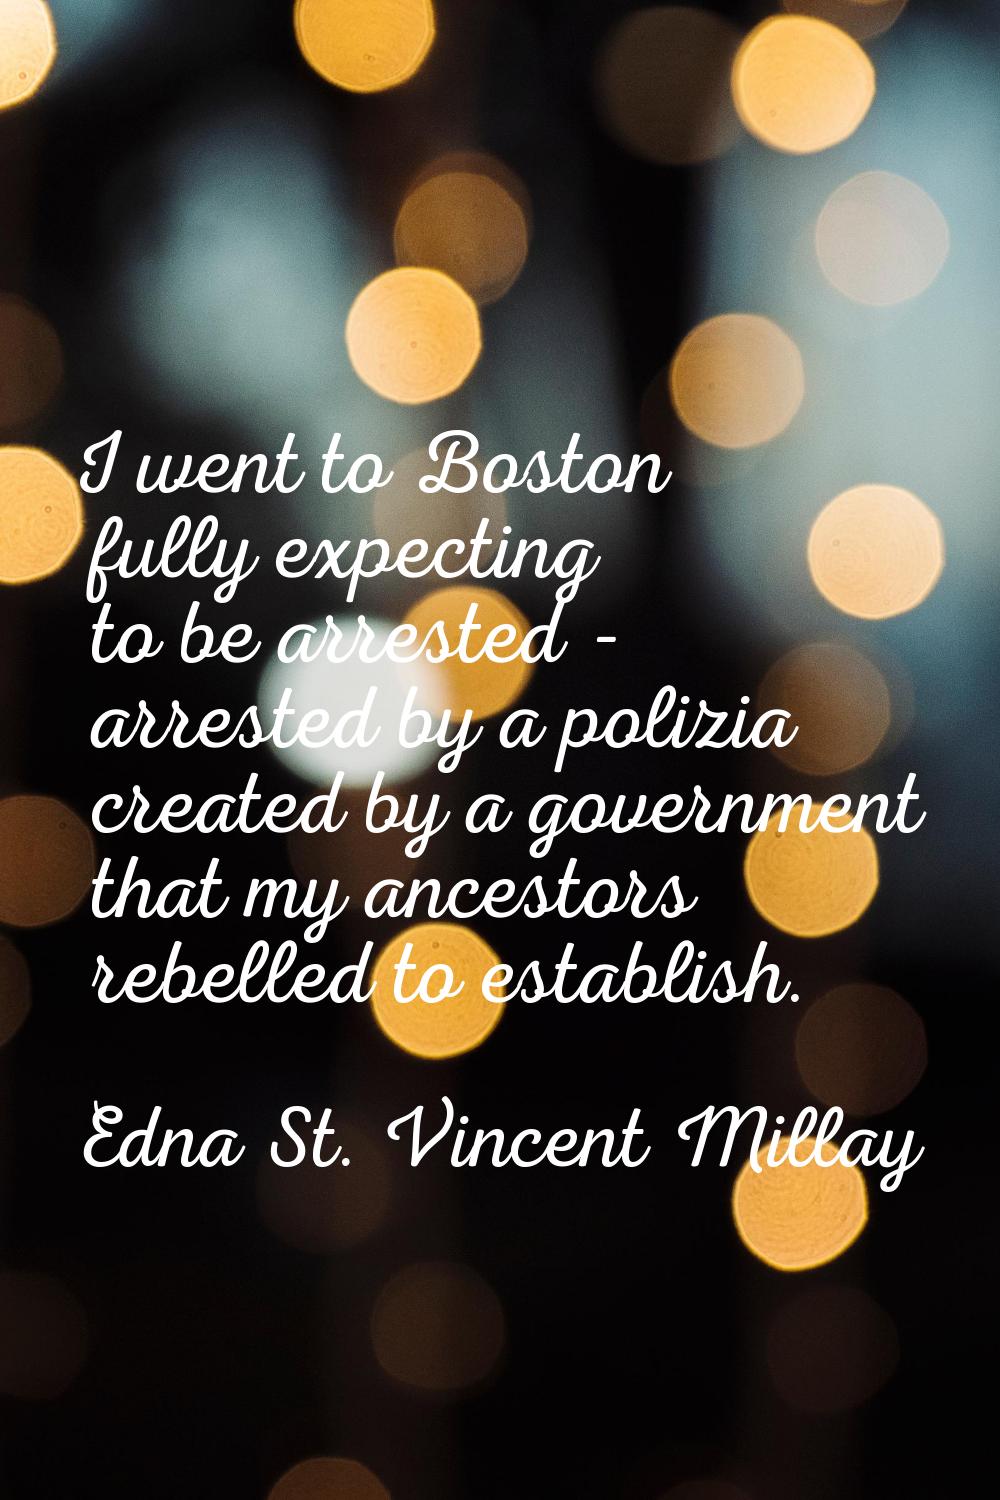 I went to Boston fully expecting to be arrested - arrested by a polizia created by a government tha